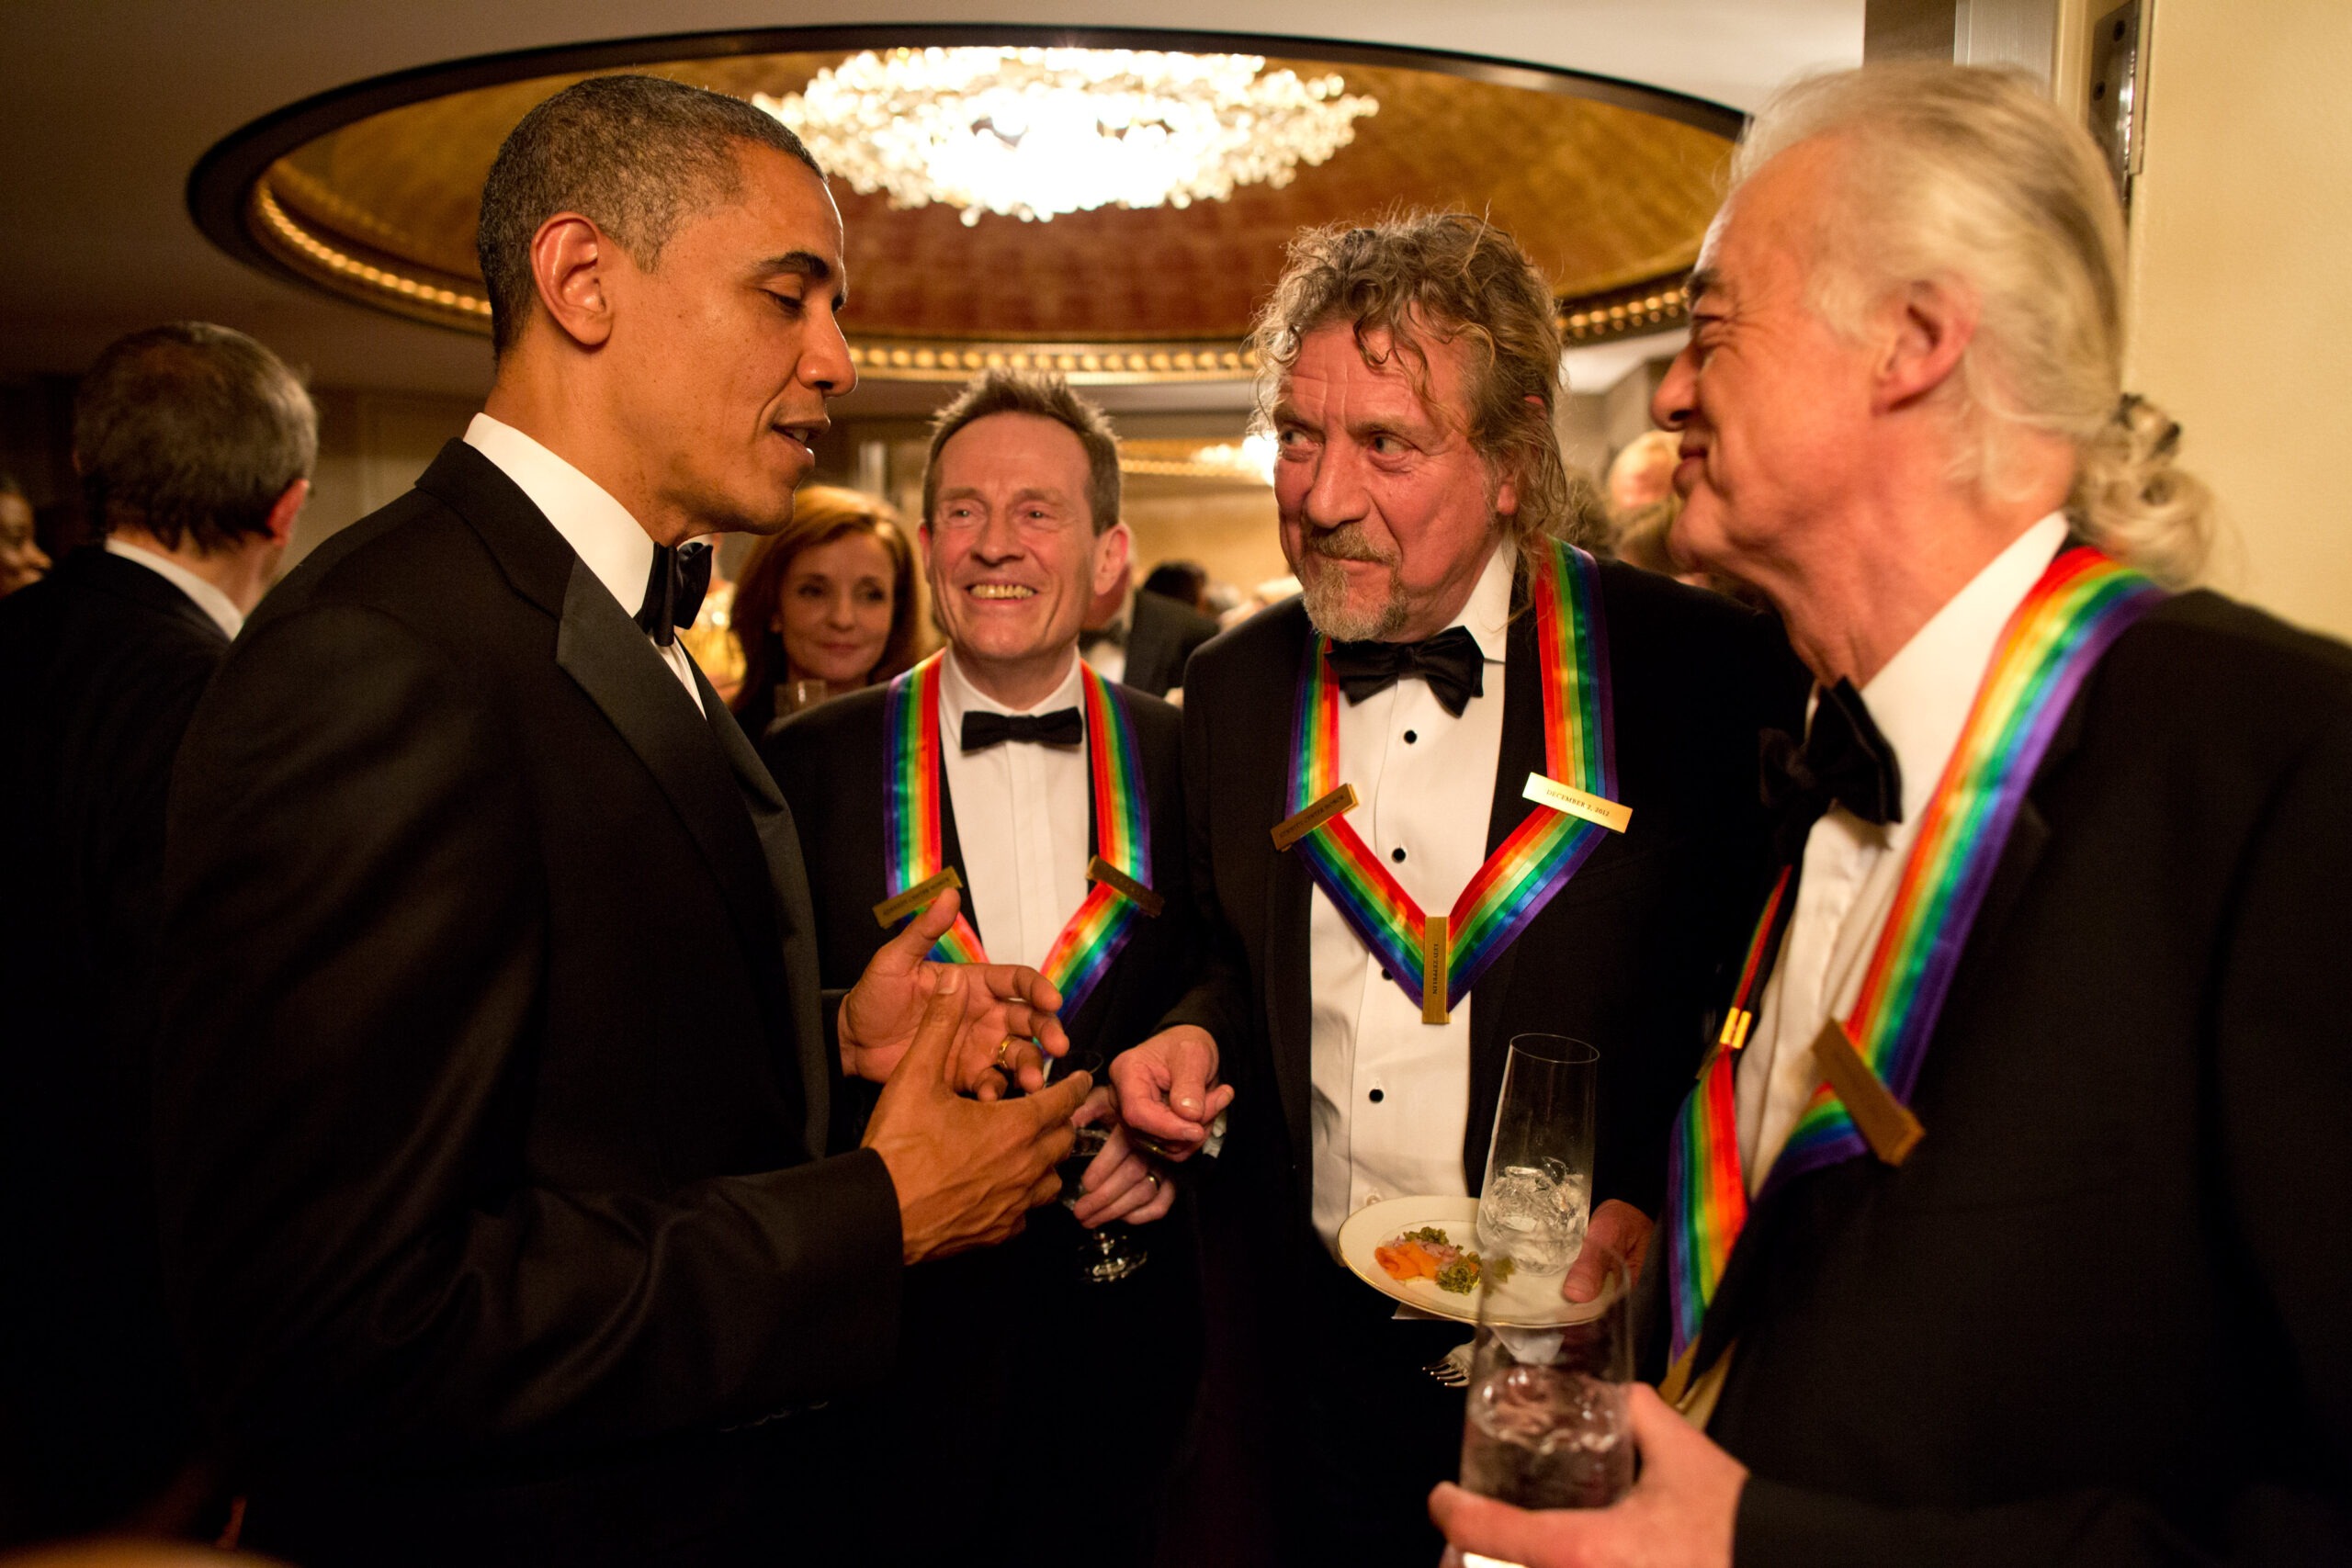 President Barack Obama speaks with the surviving members of Led Zeppelin – John Paul Jones, Robert Plant and Jimmy Page – at the 2012 Kennedy Center Honors event